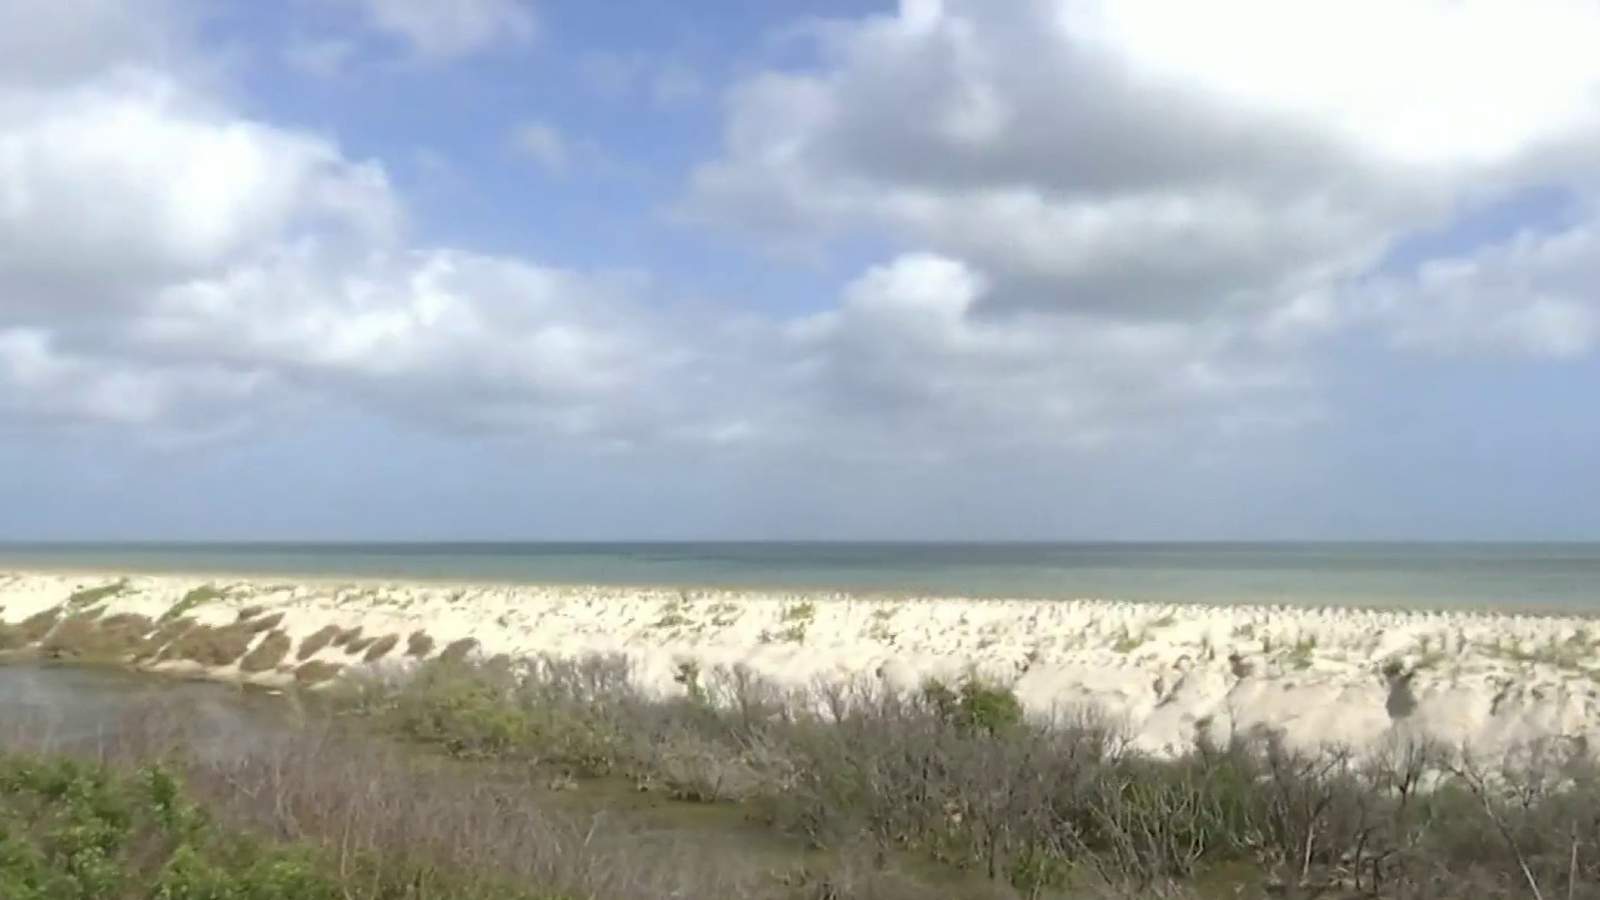 Dune restoration to protect launch operations at Kennedy Space Center from rising sea levels